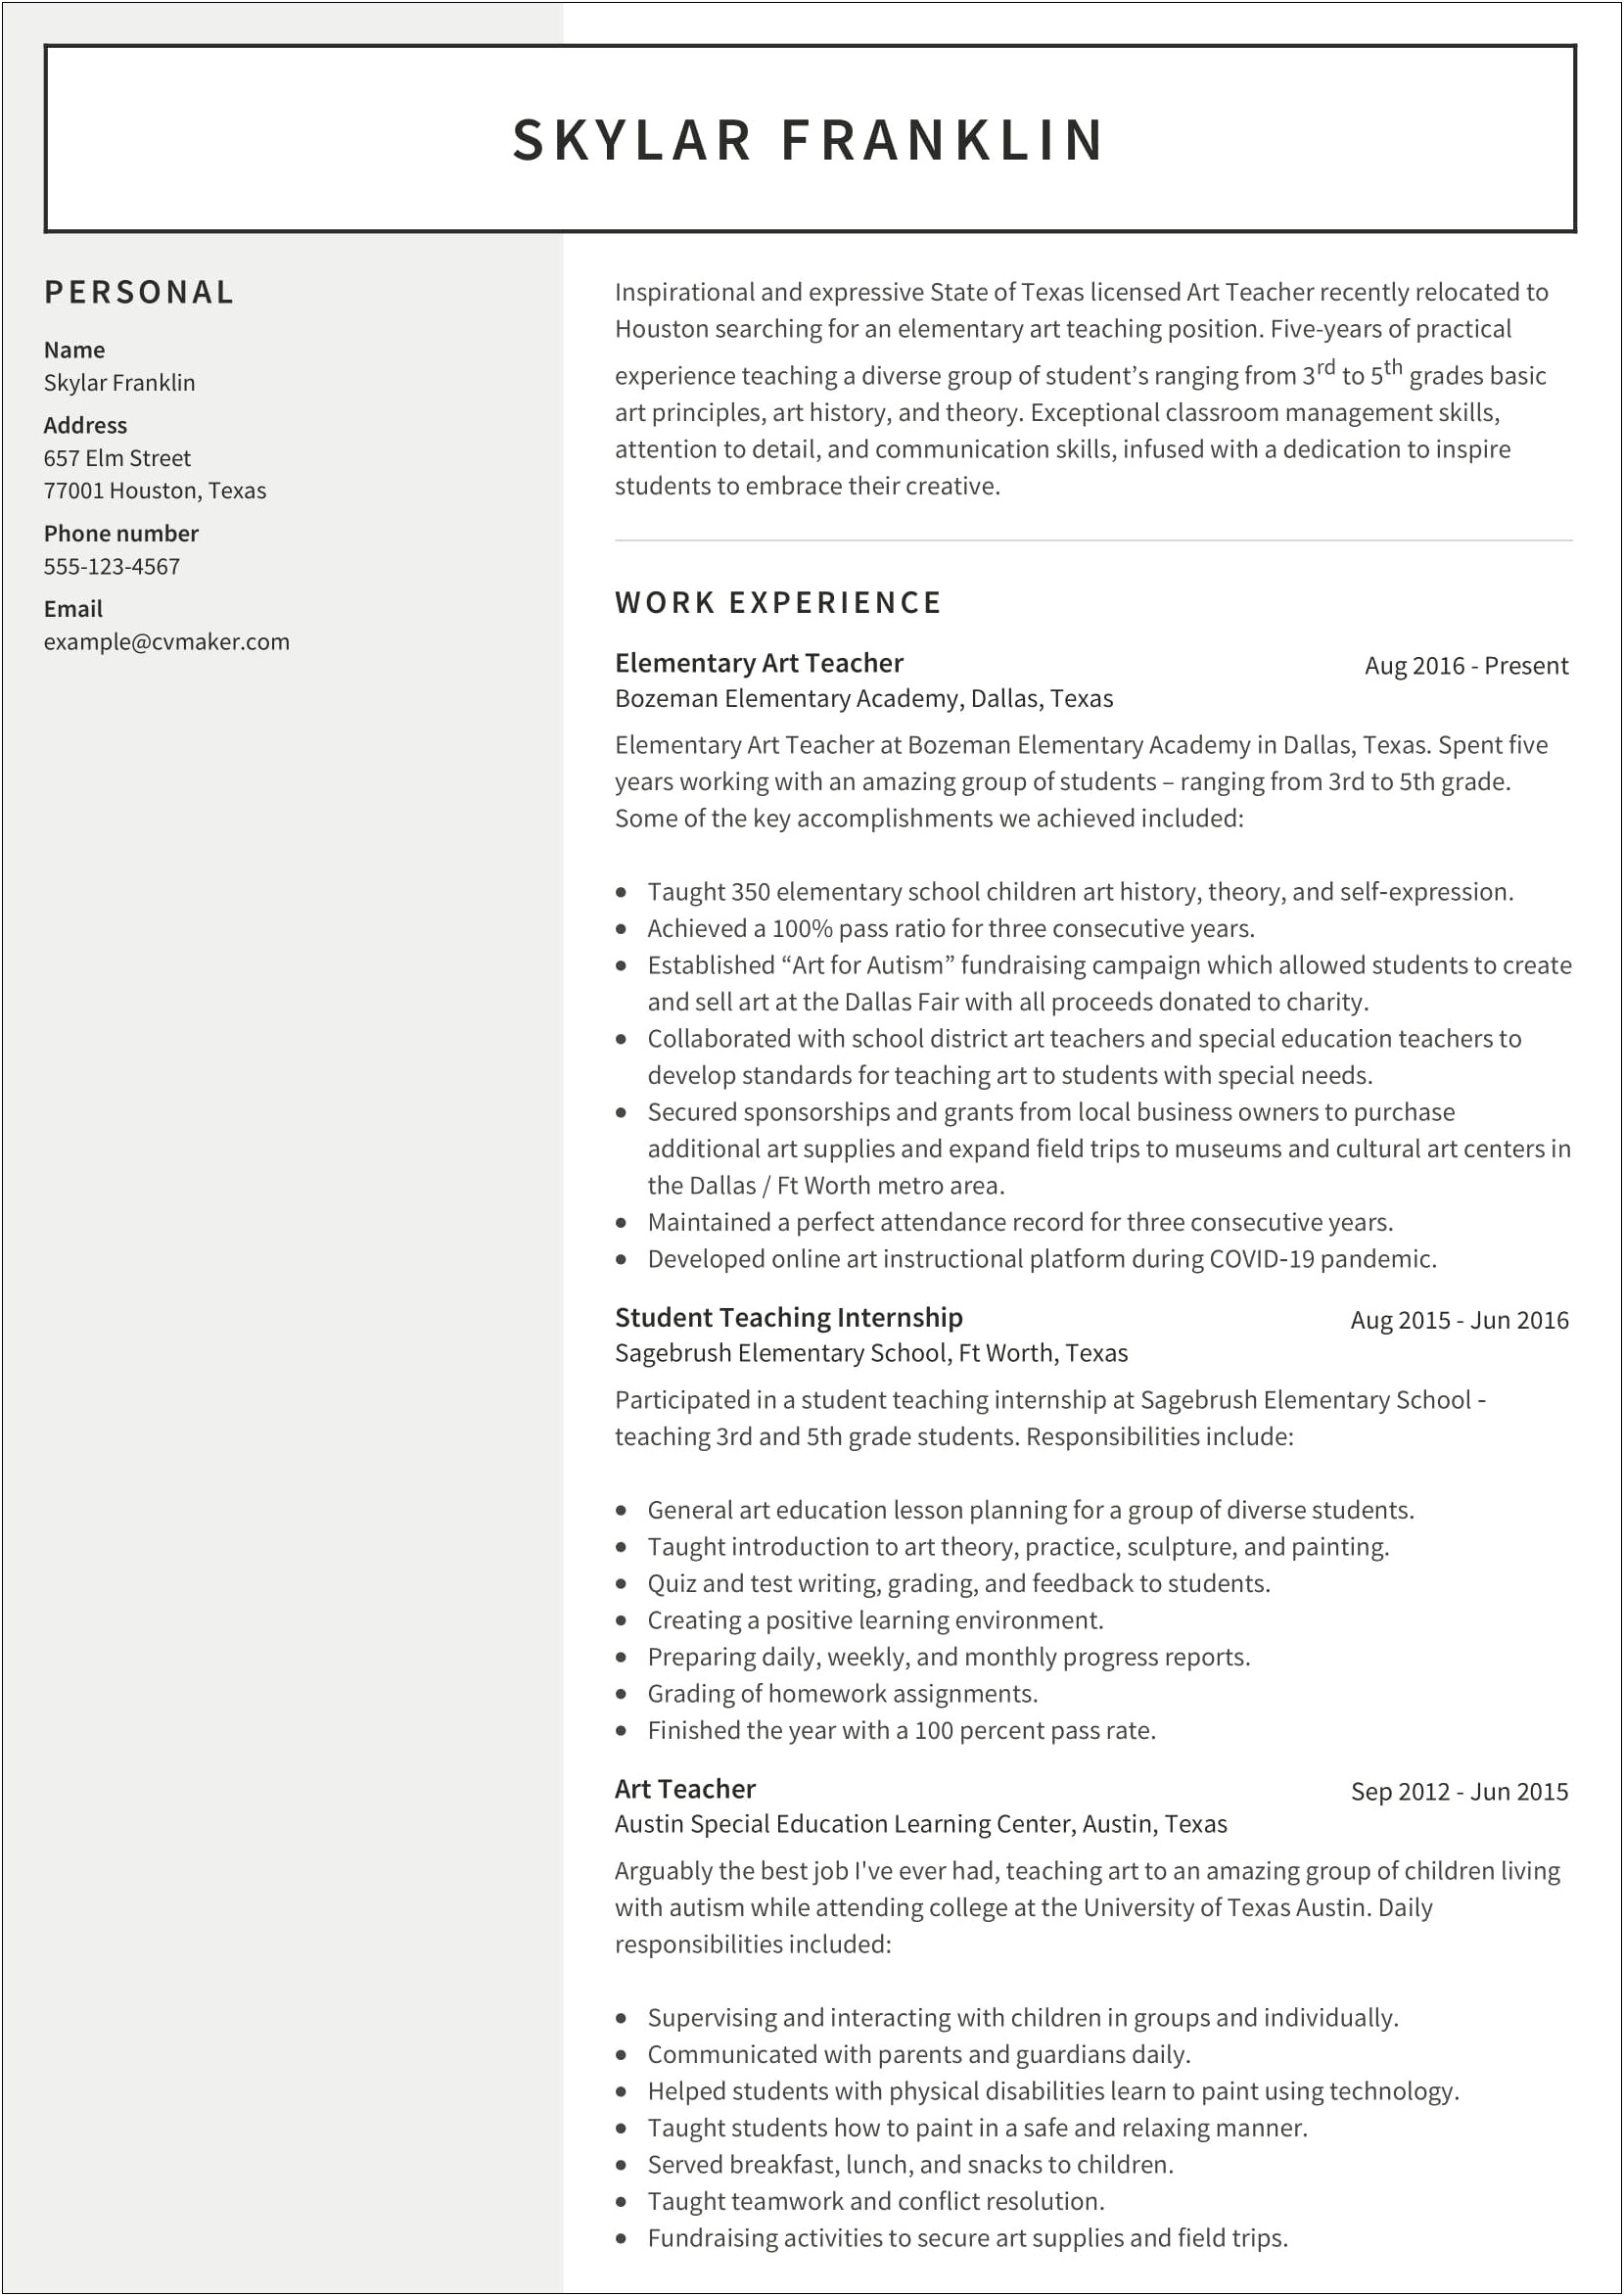 Sample Resumes For College Students With Creative Experience